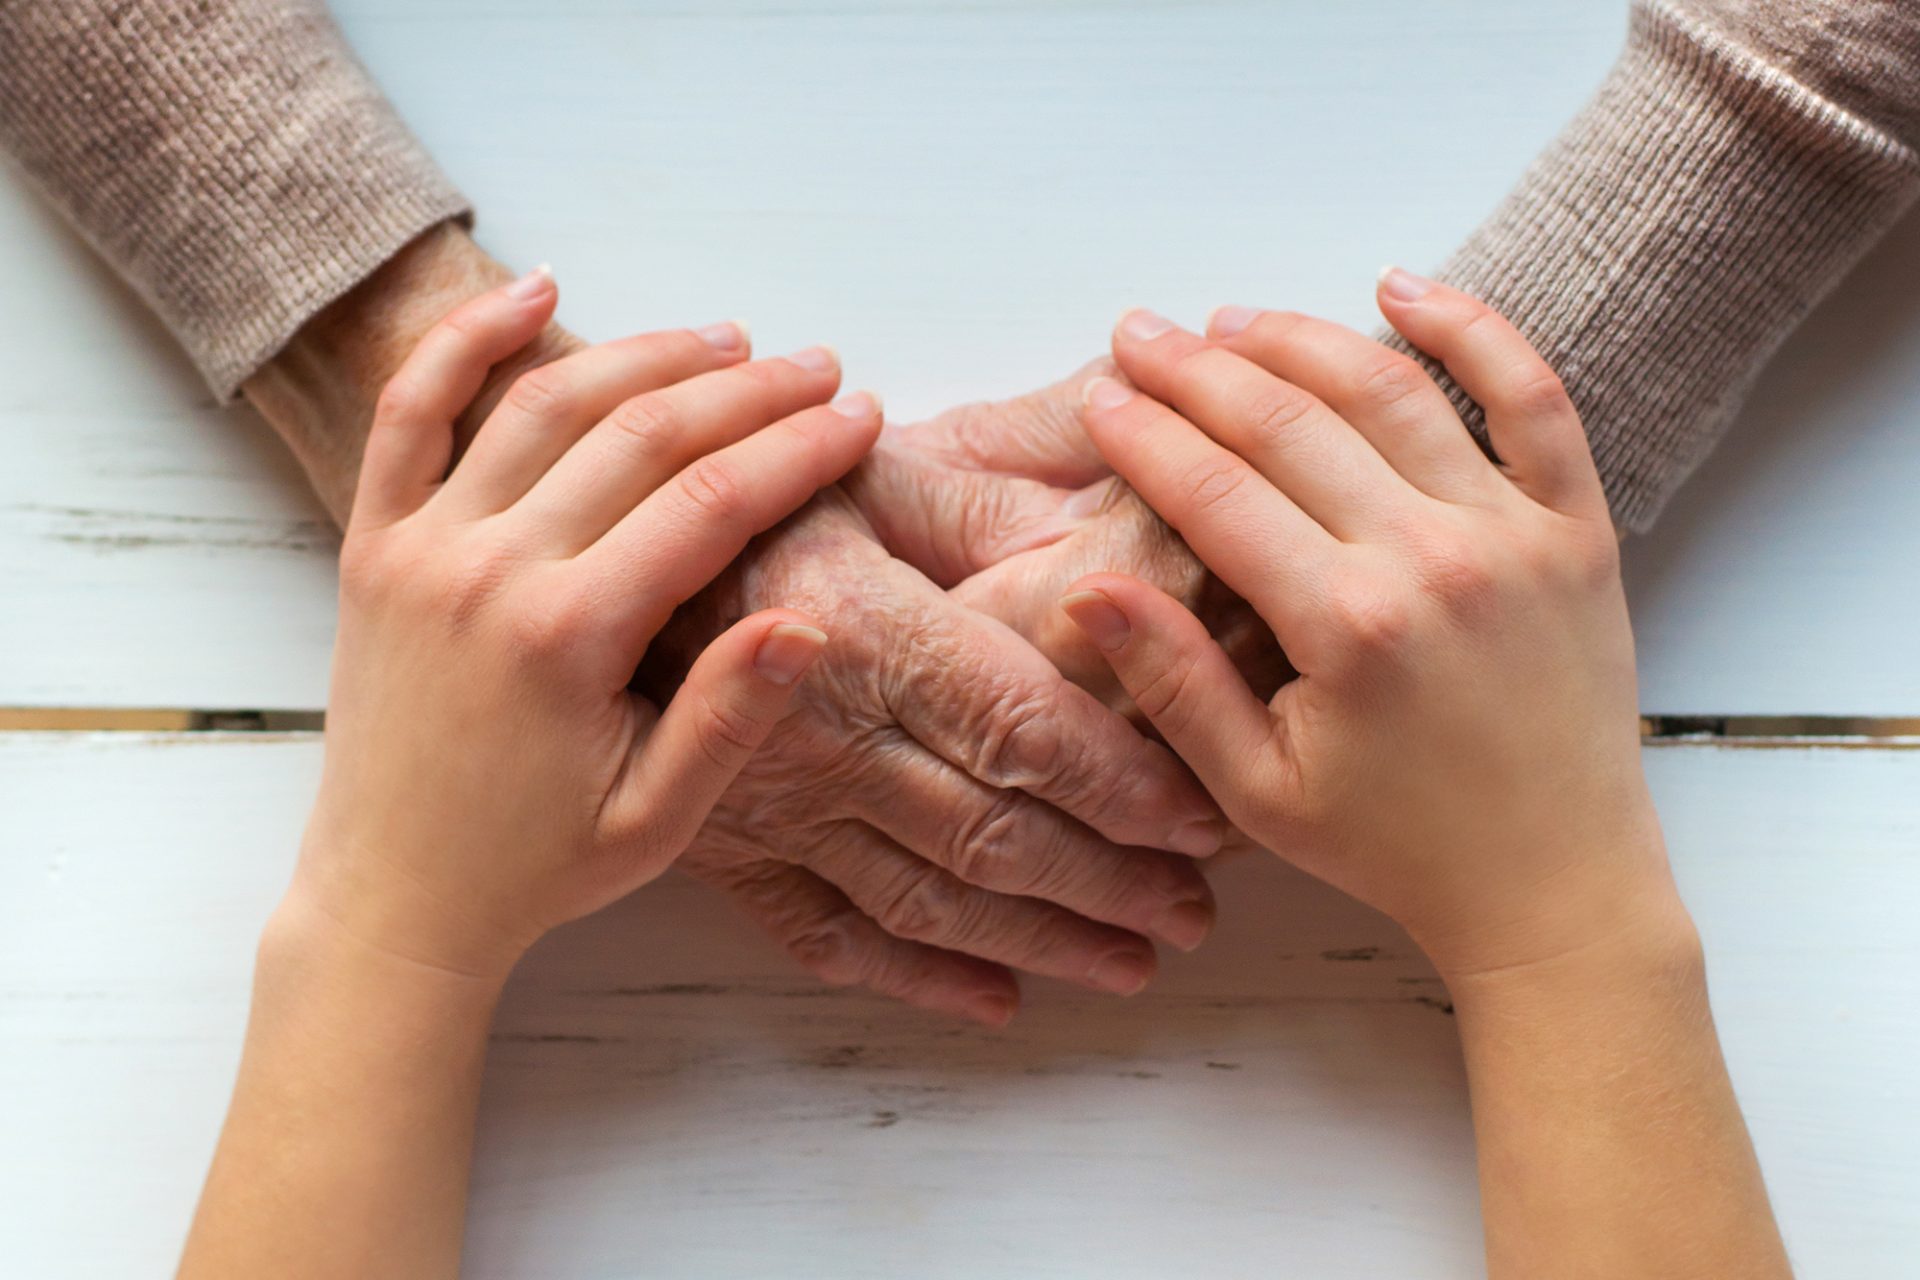 young hands holding elderly person's hands